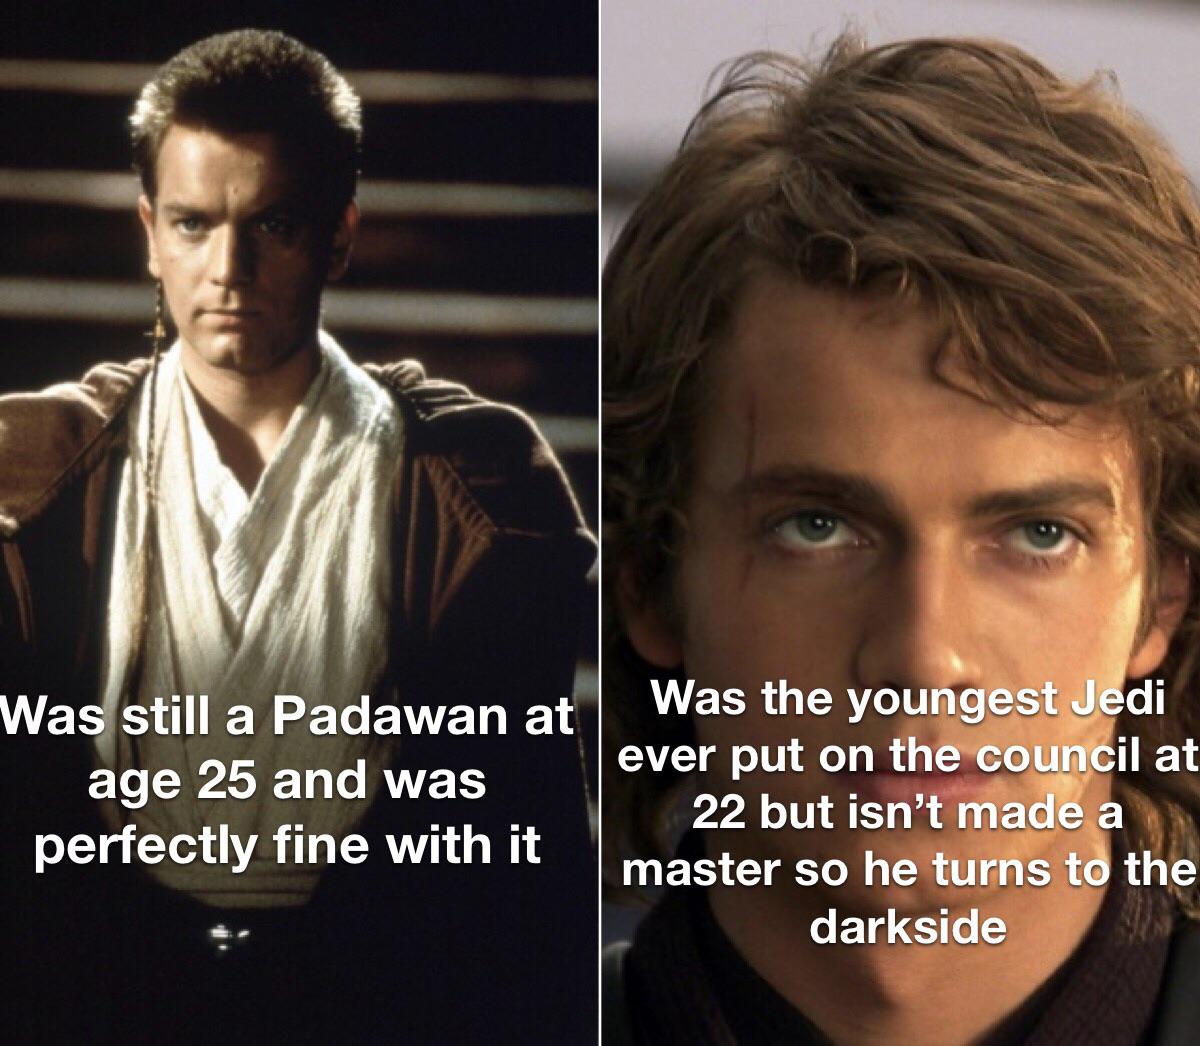 Prequel-memes, Anakin, Jedi, Palpatine, Master, Ahsoka Star Wars Memes Prequel-memes, Anakin, Jedi, Palpatine, Master, Ahsoka text: Wa still a Padawan at age 25 and was perfectly fine with it Was the youngest J di ever put on the coun' il at 22 but isn't made master so he turnst the darkside 